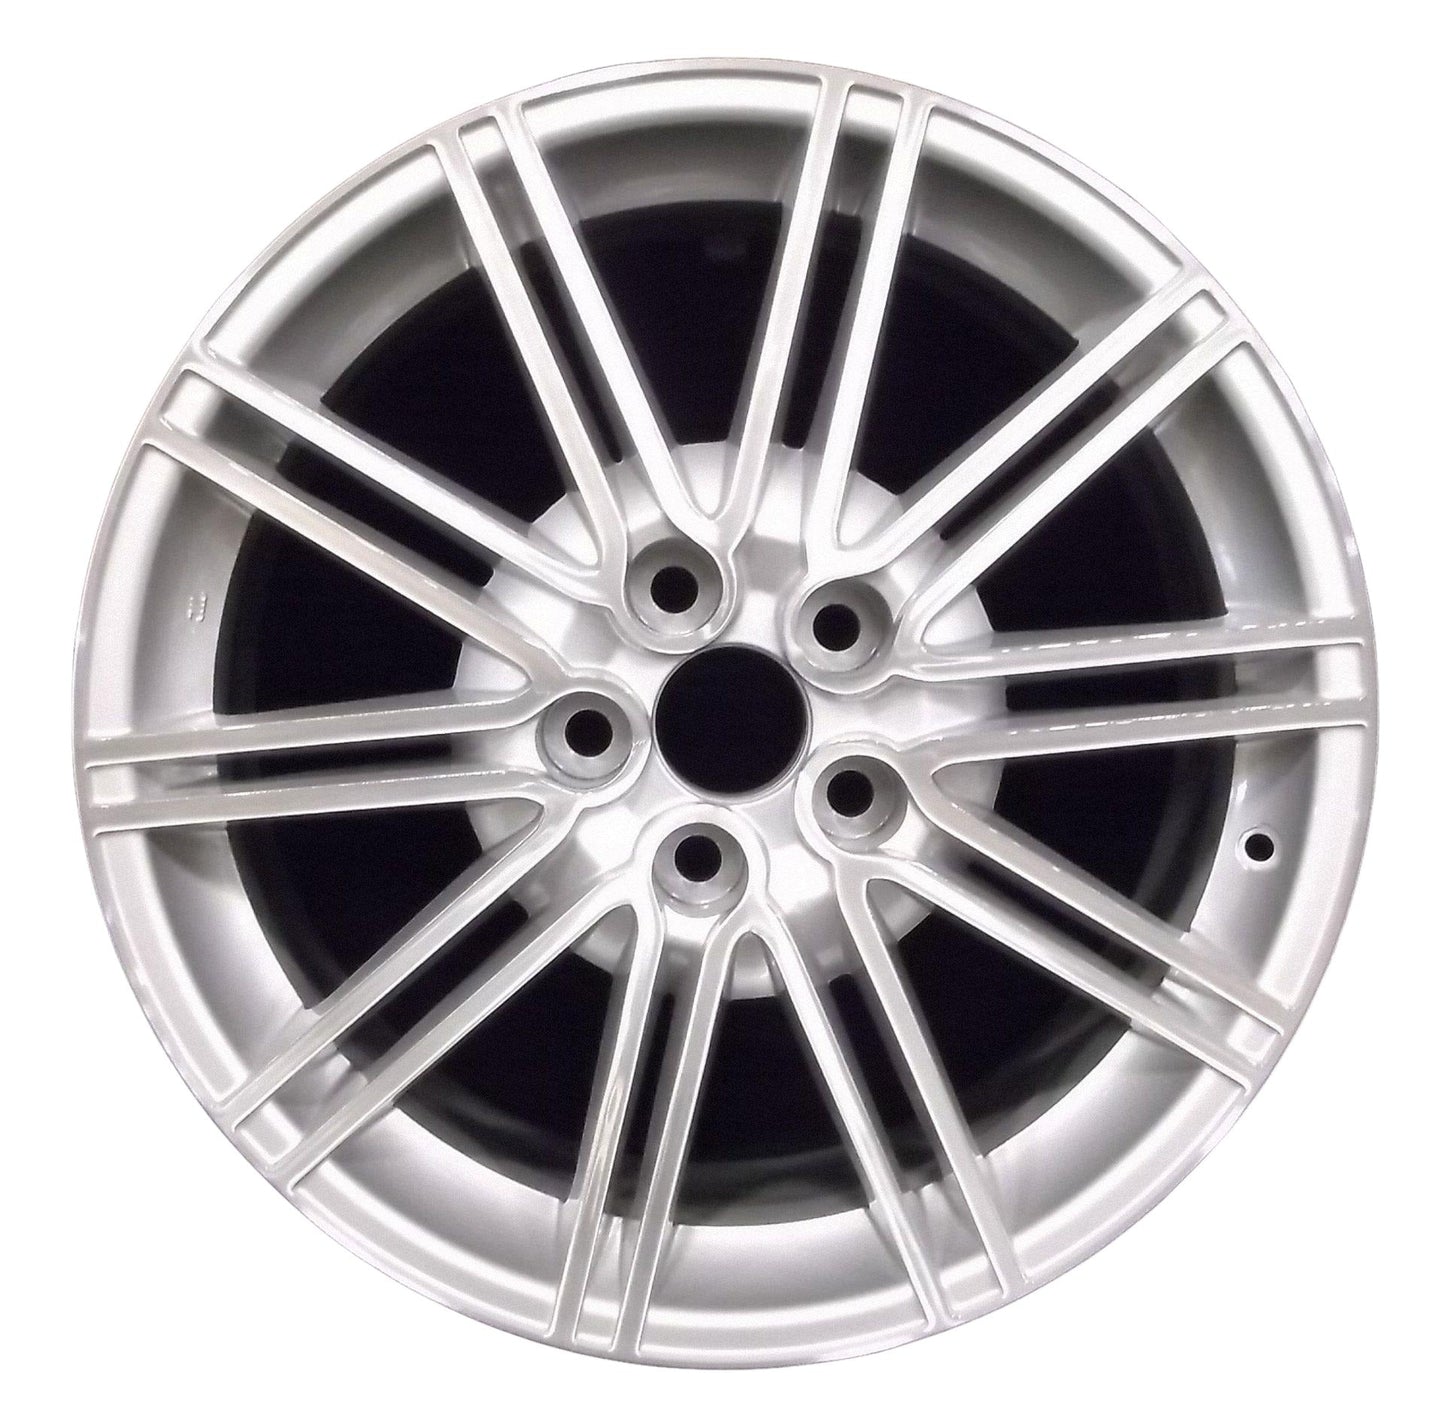 Toyota Camry  2007, 2008, 2009, 2010, 2011 Factory OEM Car Wheel Size 18x7.5 Alloy WAO.180086.PS15.MA